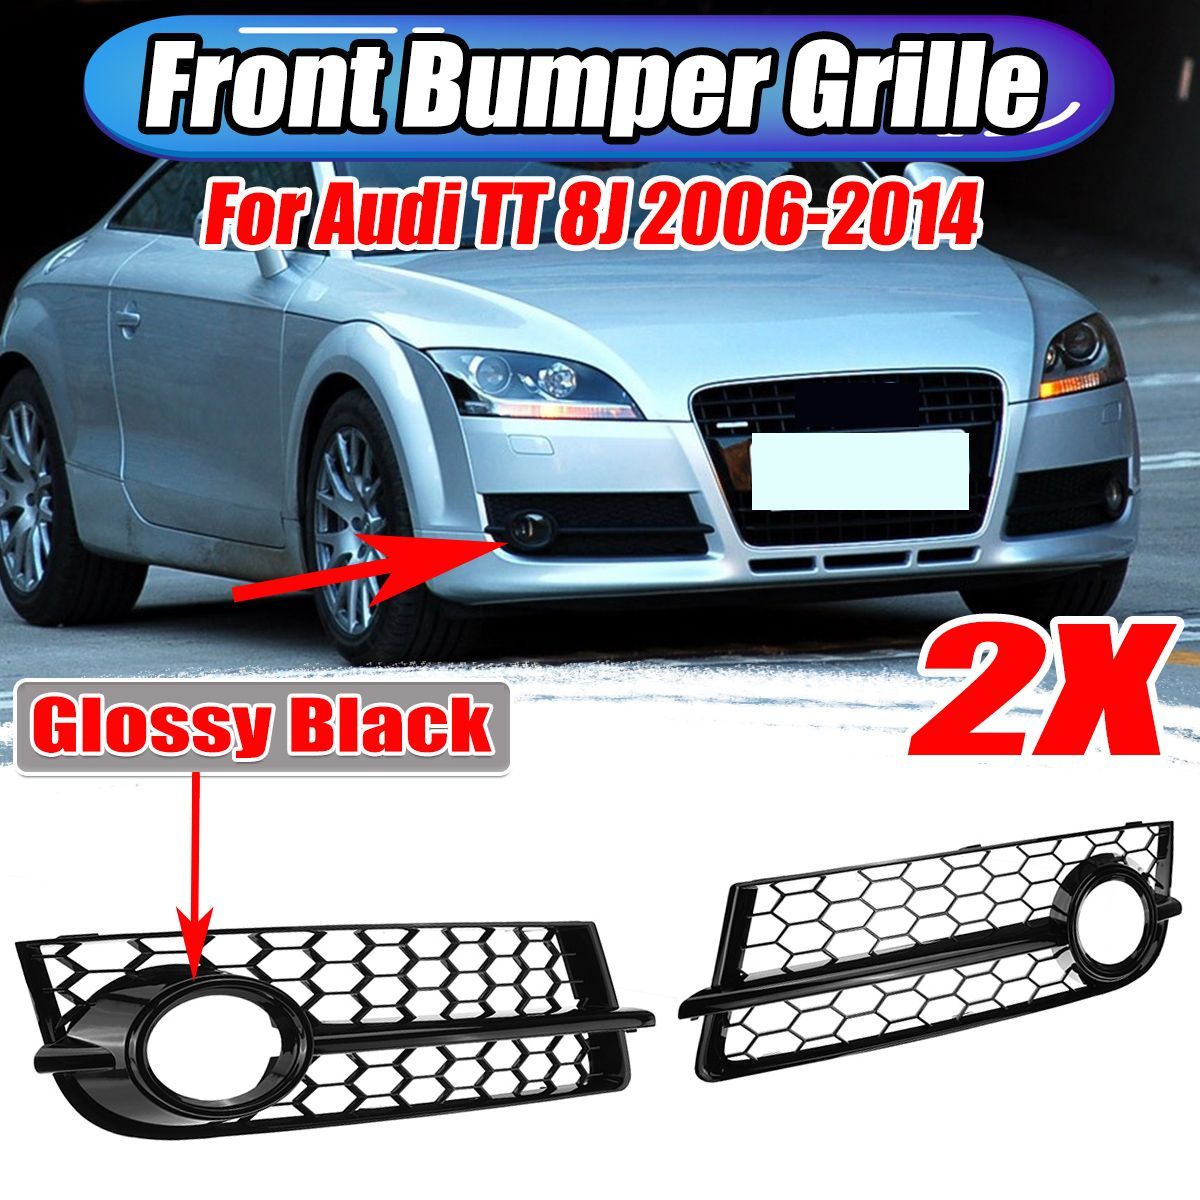 Front-Fog-Light-Lamp-Grille-Grill-Cover-Honeycomb-Hex-RS-Style-Glossy-Black-For-Audi-TT-8J-2006-2014-1750295